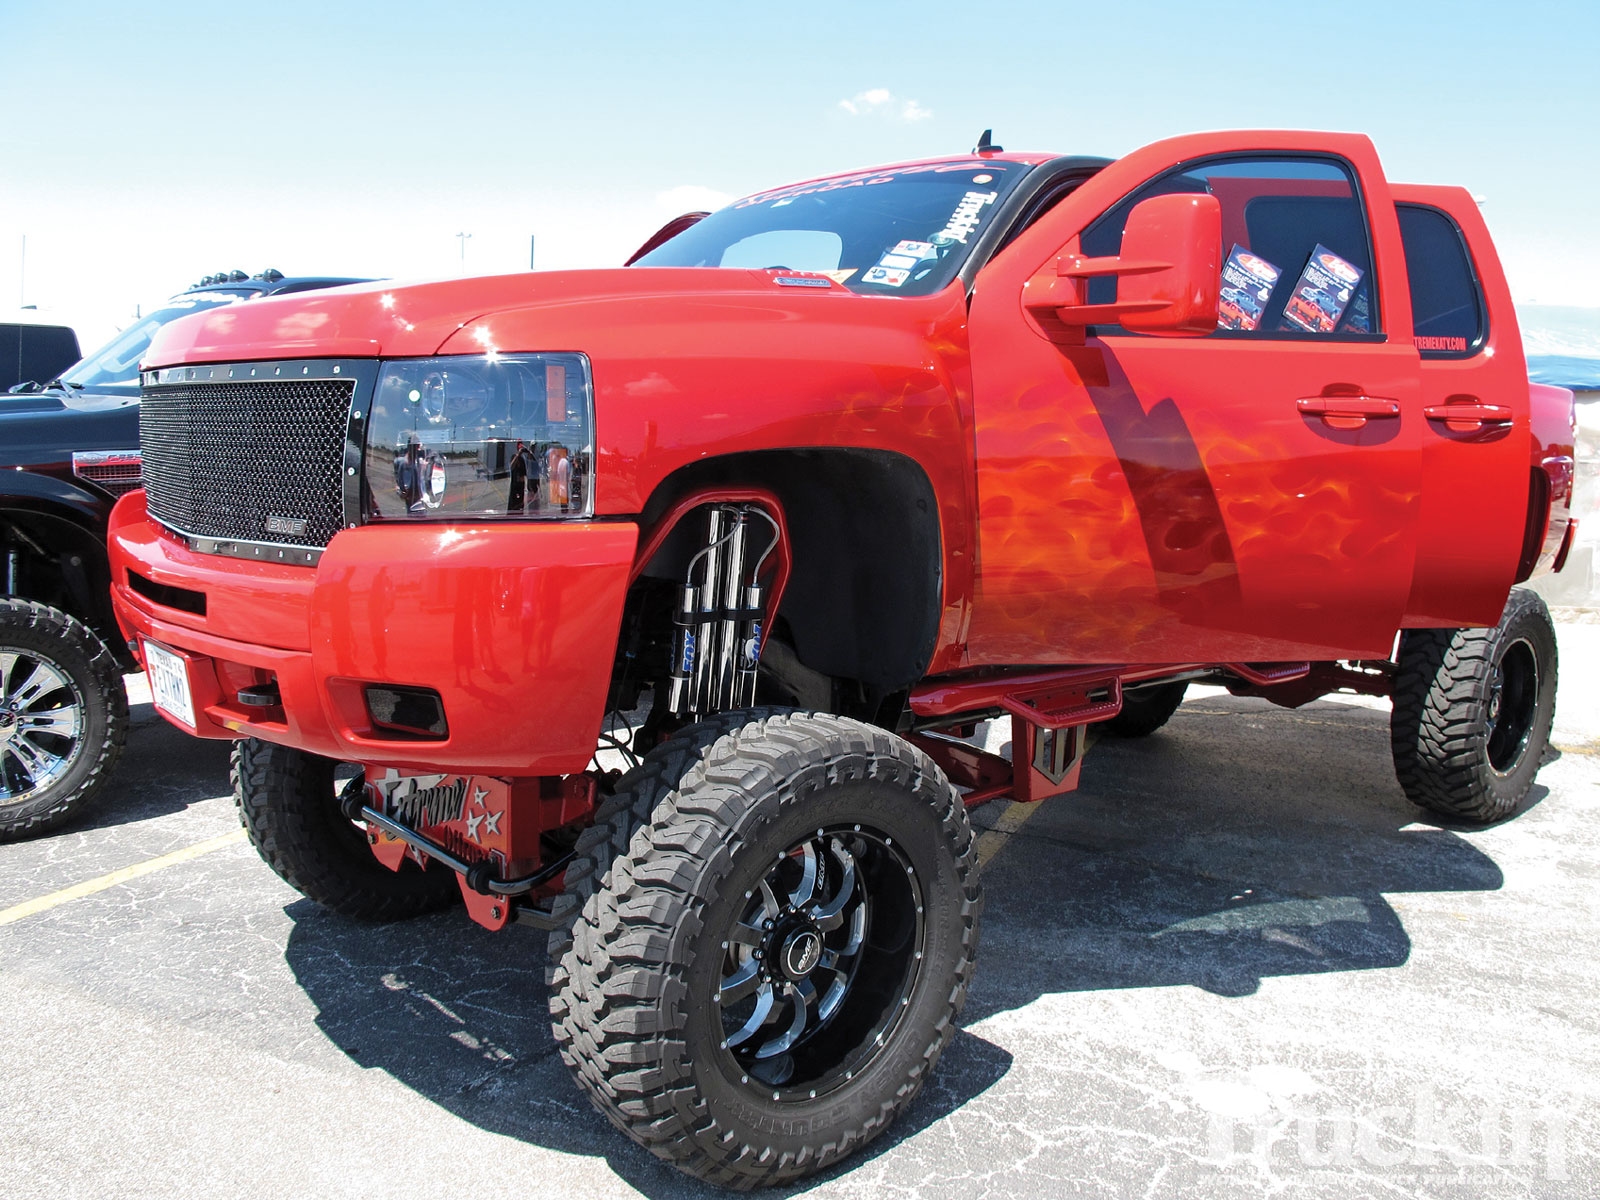 Socaltrucks Lifted Truck Classifieds Chevy